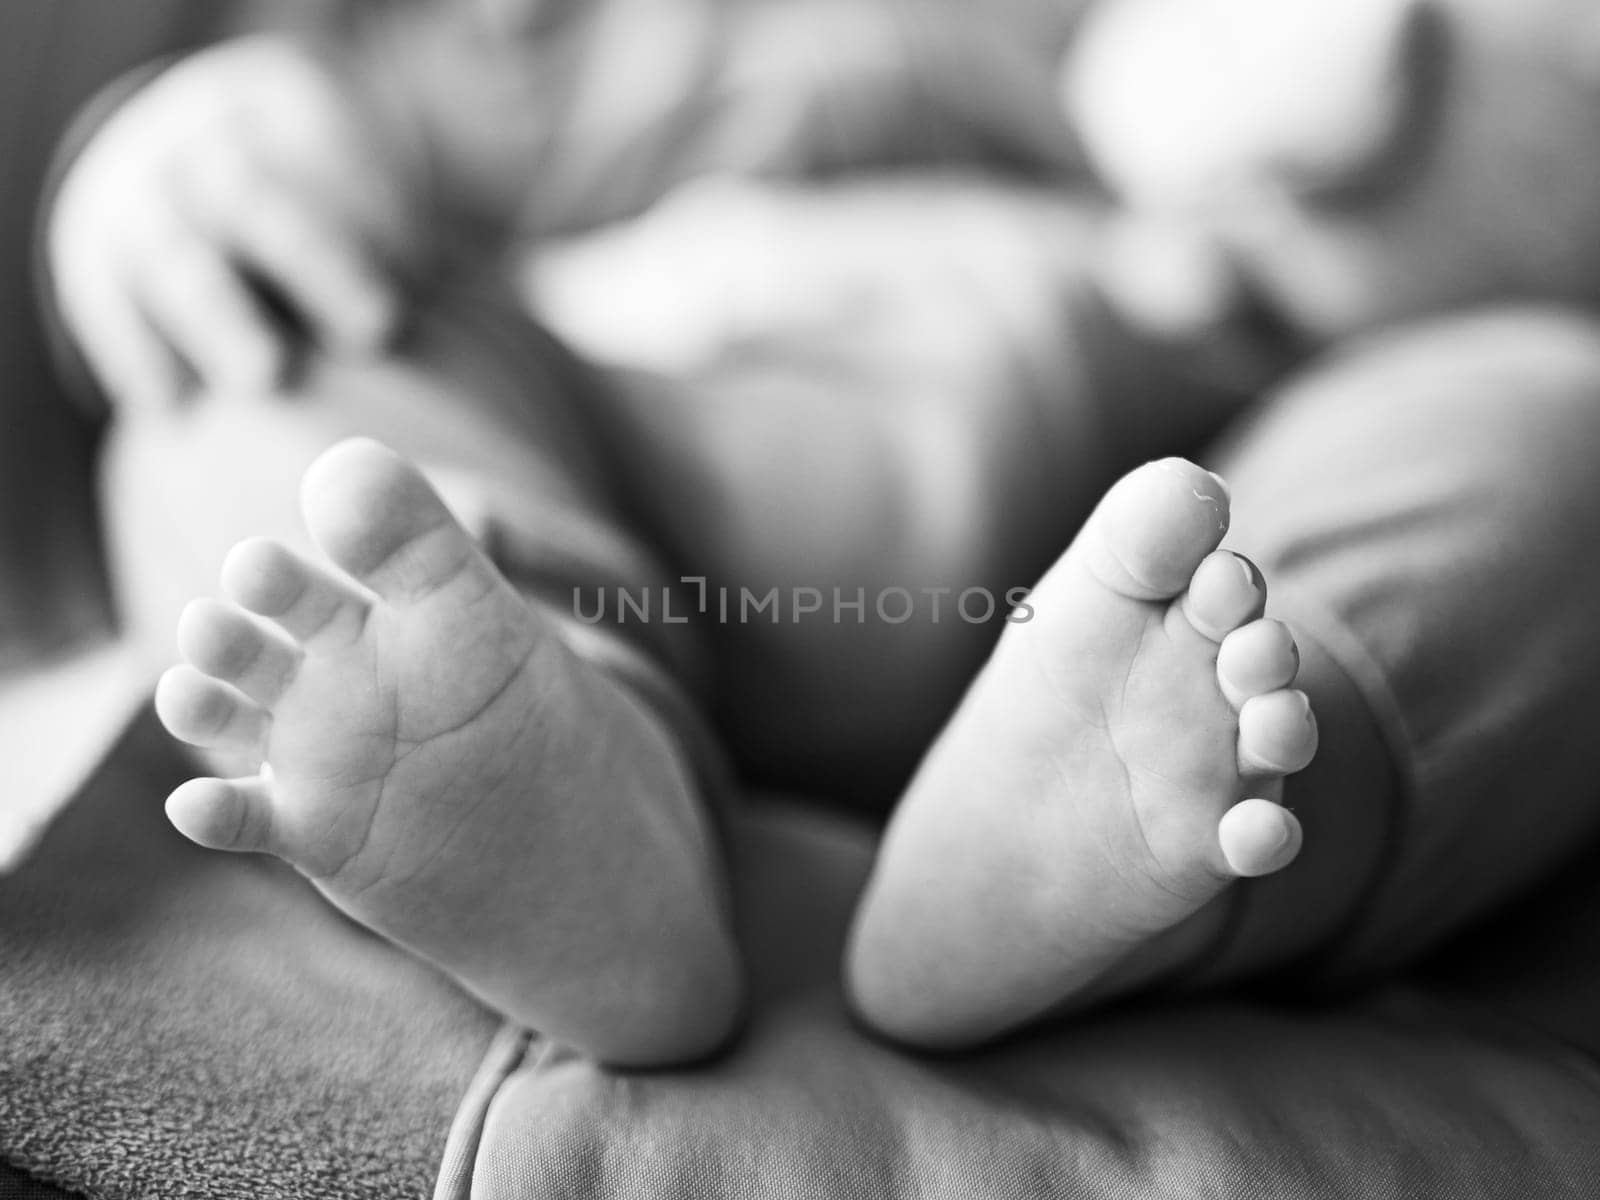 Close-up of cute little baby feet, innocence concept. Black and white image. by kasto